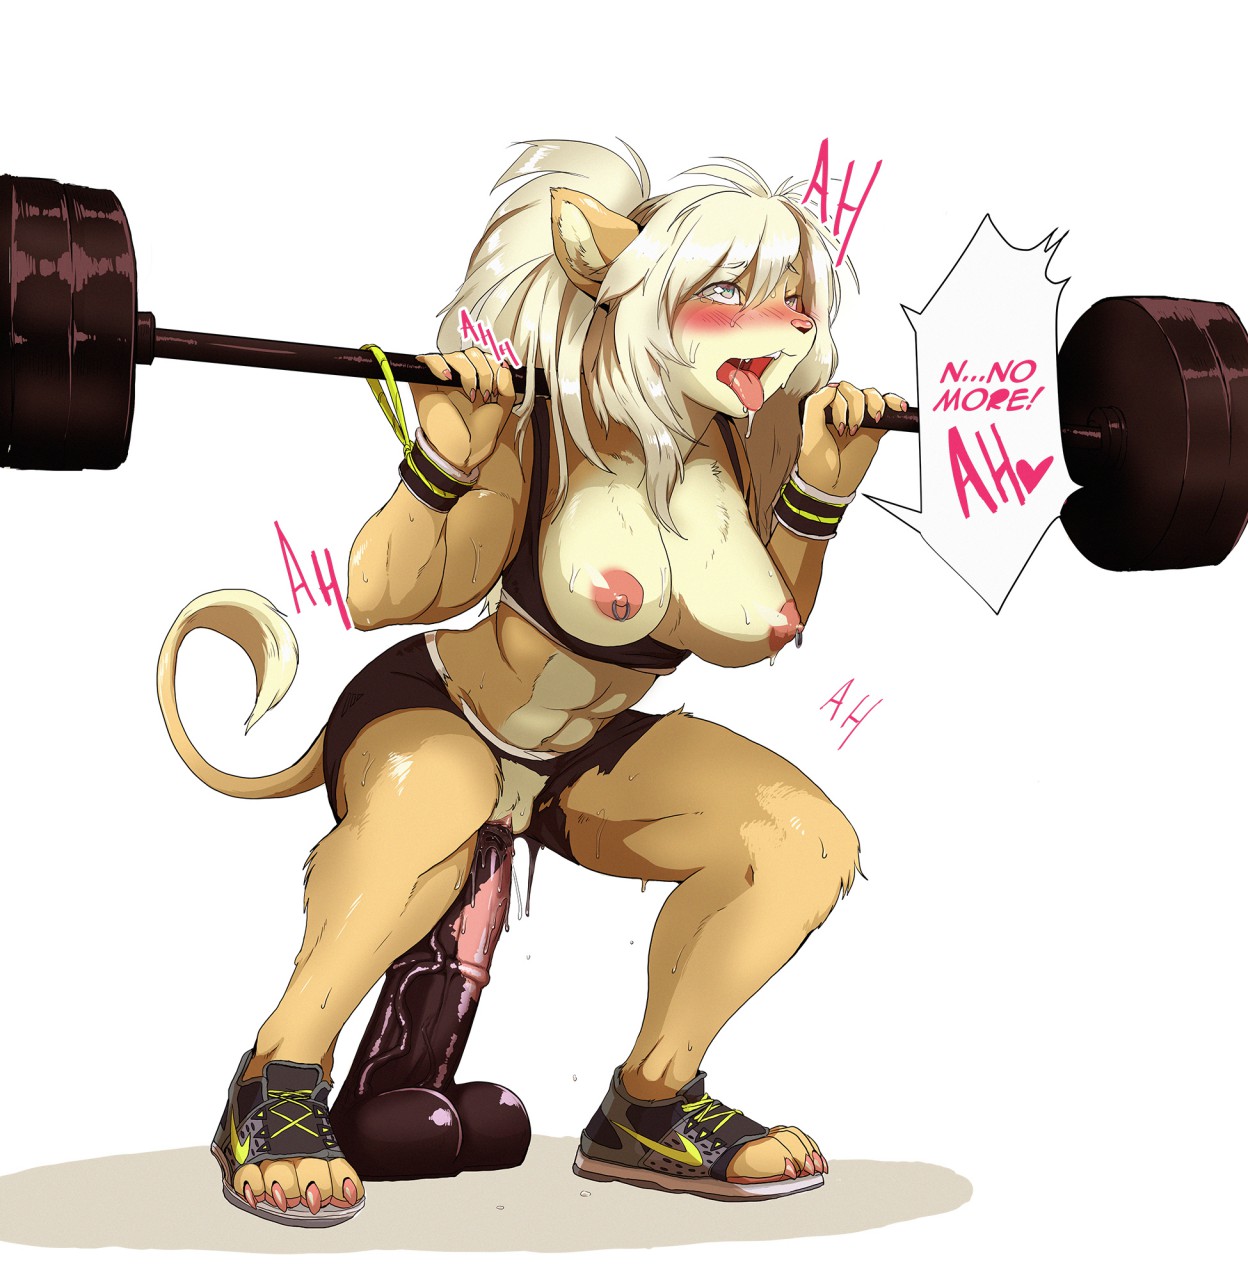 1529627490.shebeast_work_out_lion_color_ver_finished_com_nipple_pierce